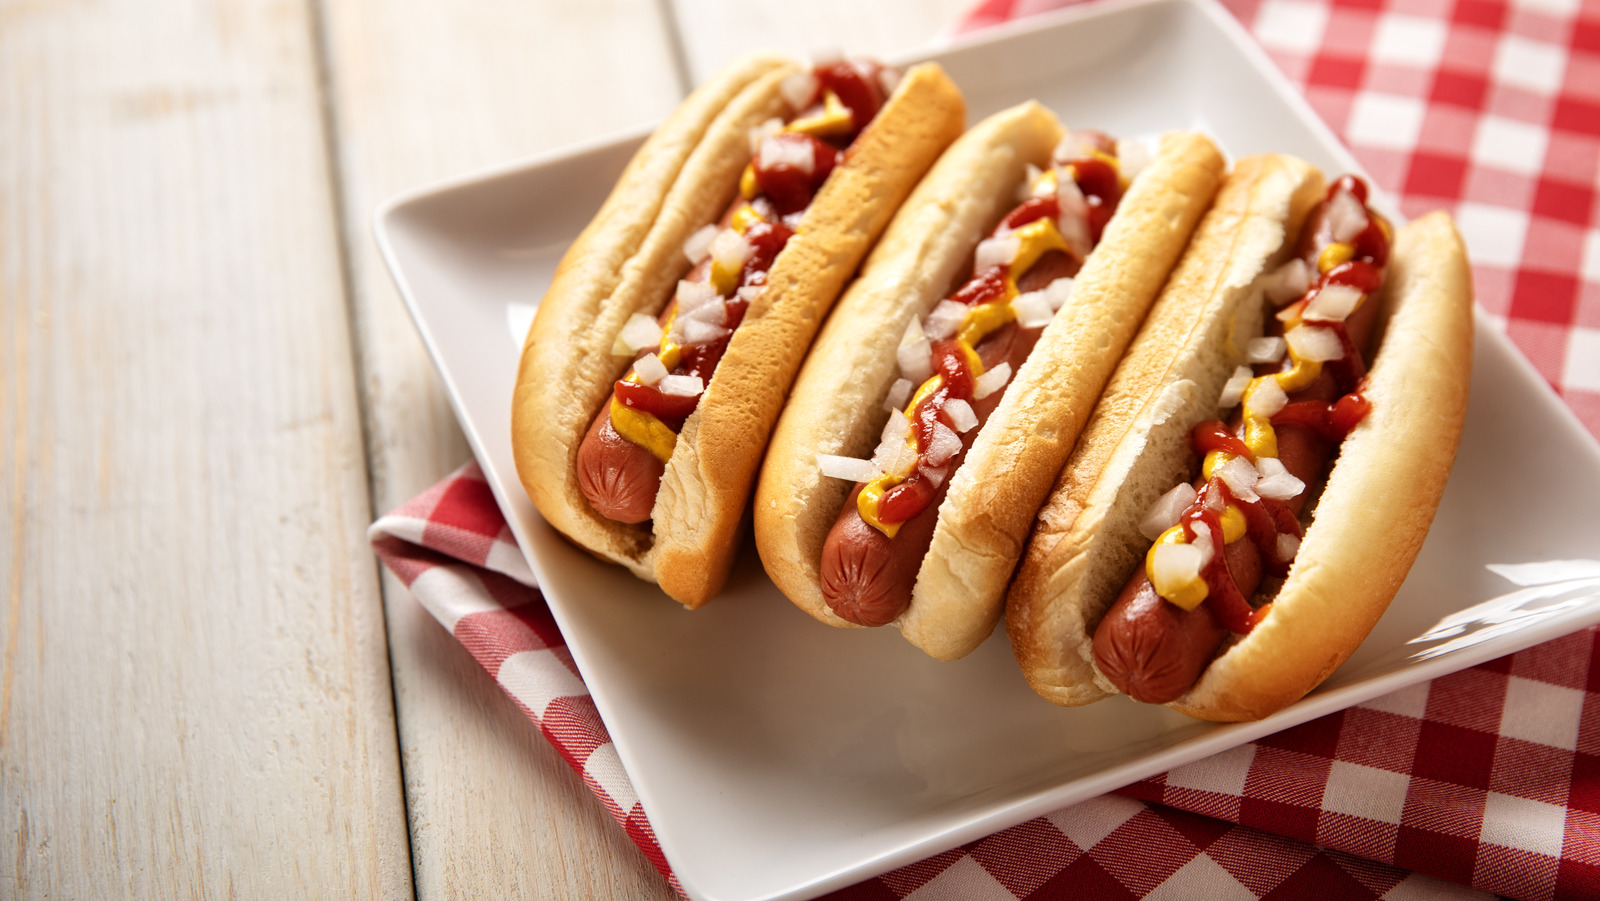 Salted or unsalted hot dogs: is there really a difference?